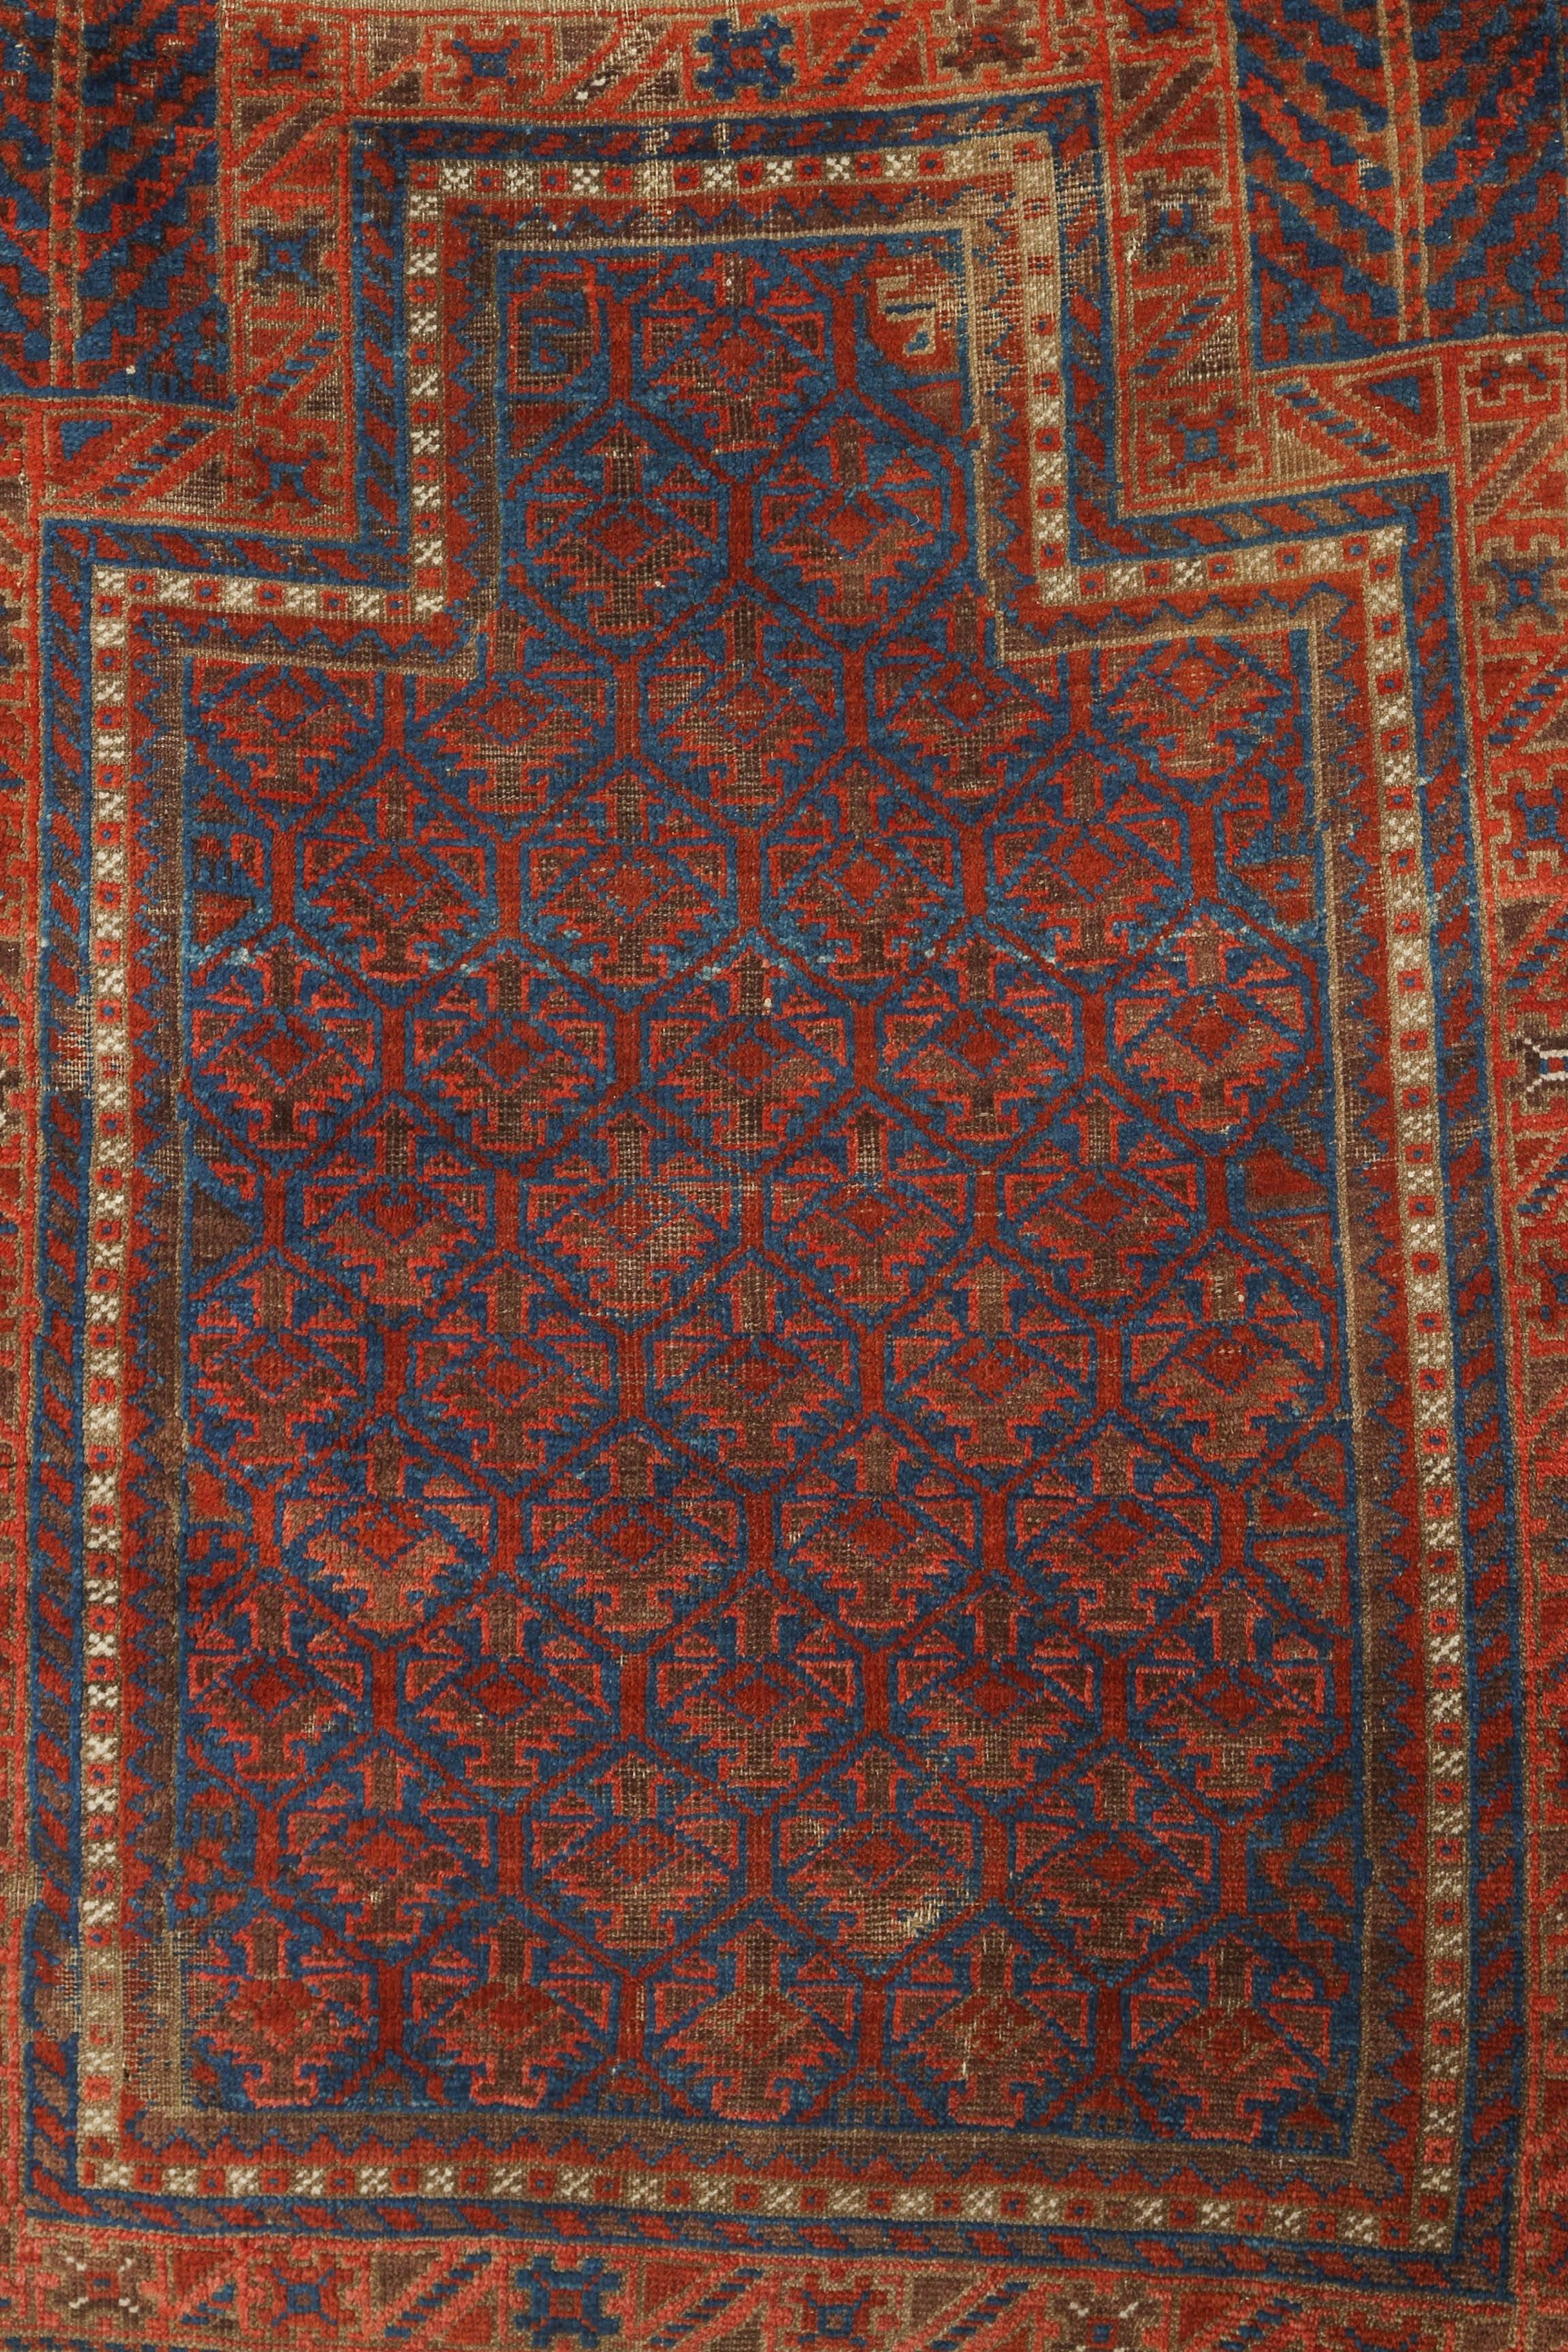 Handwoven, hand spun wool tribal rug. Unusual blue field. Even wear with one small area quite low. Rug complete with quite sizable Kilim ends. Some missing wool on overcast sides.